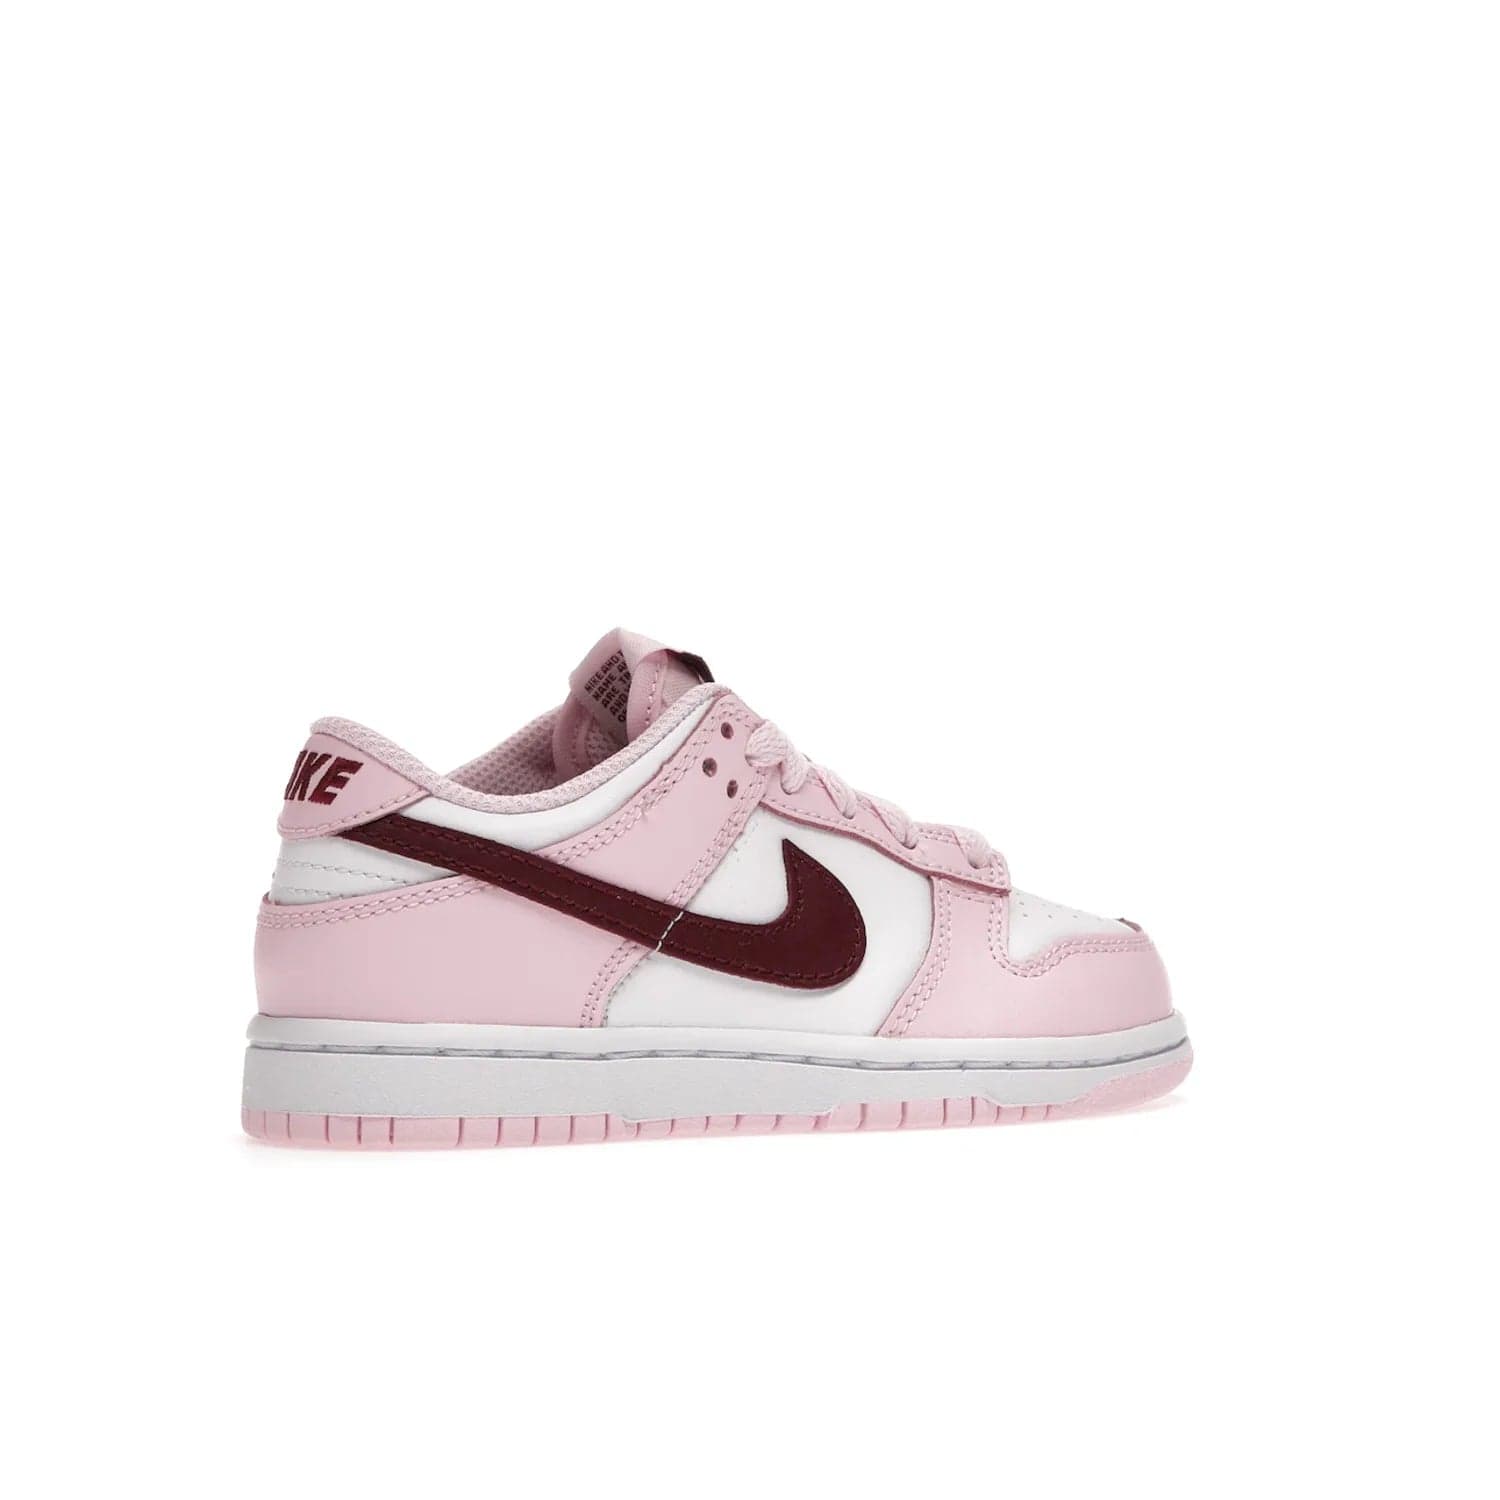 Nike Dunk Low Pink Red White (PS) - Image 34 - Only at www.BallersClubKickz.com - Introducing the Nike Dunk Low Pink Red White (PS), the perfect addition to your sneaker collection. A classic silhouette with modern vibrant colors, including a pink upper with red and white accents and a white midsole. Comfort and durability, perfect for any outfit. Limited edition, available June 22nd.